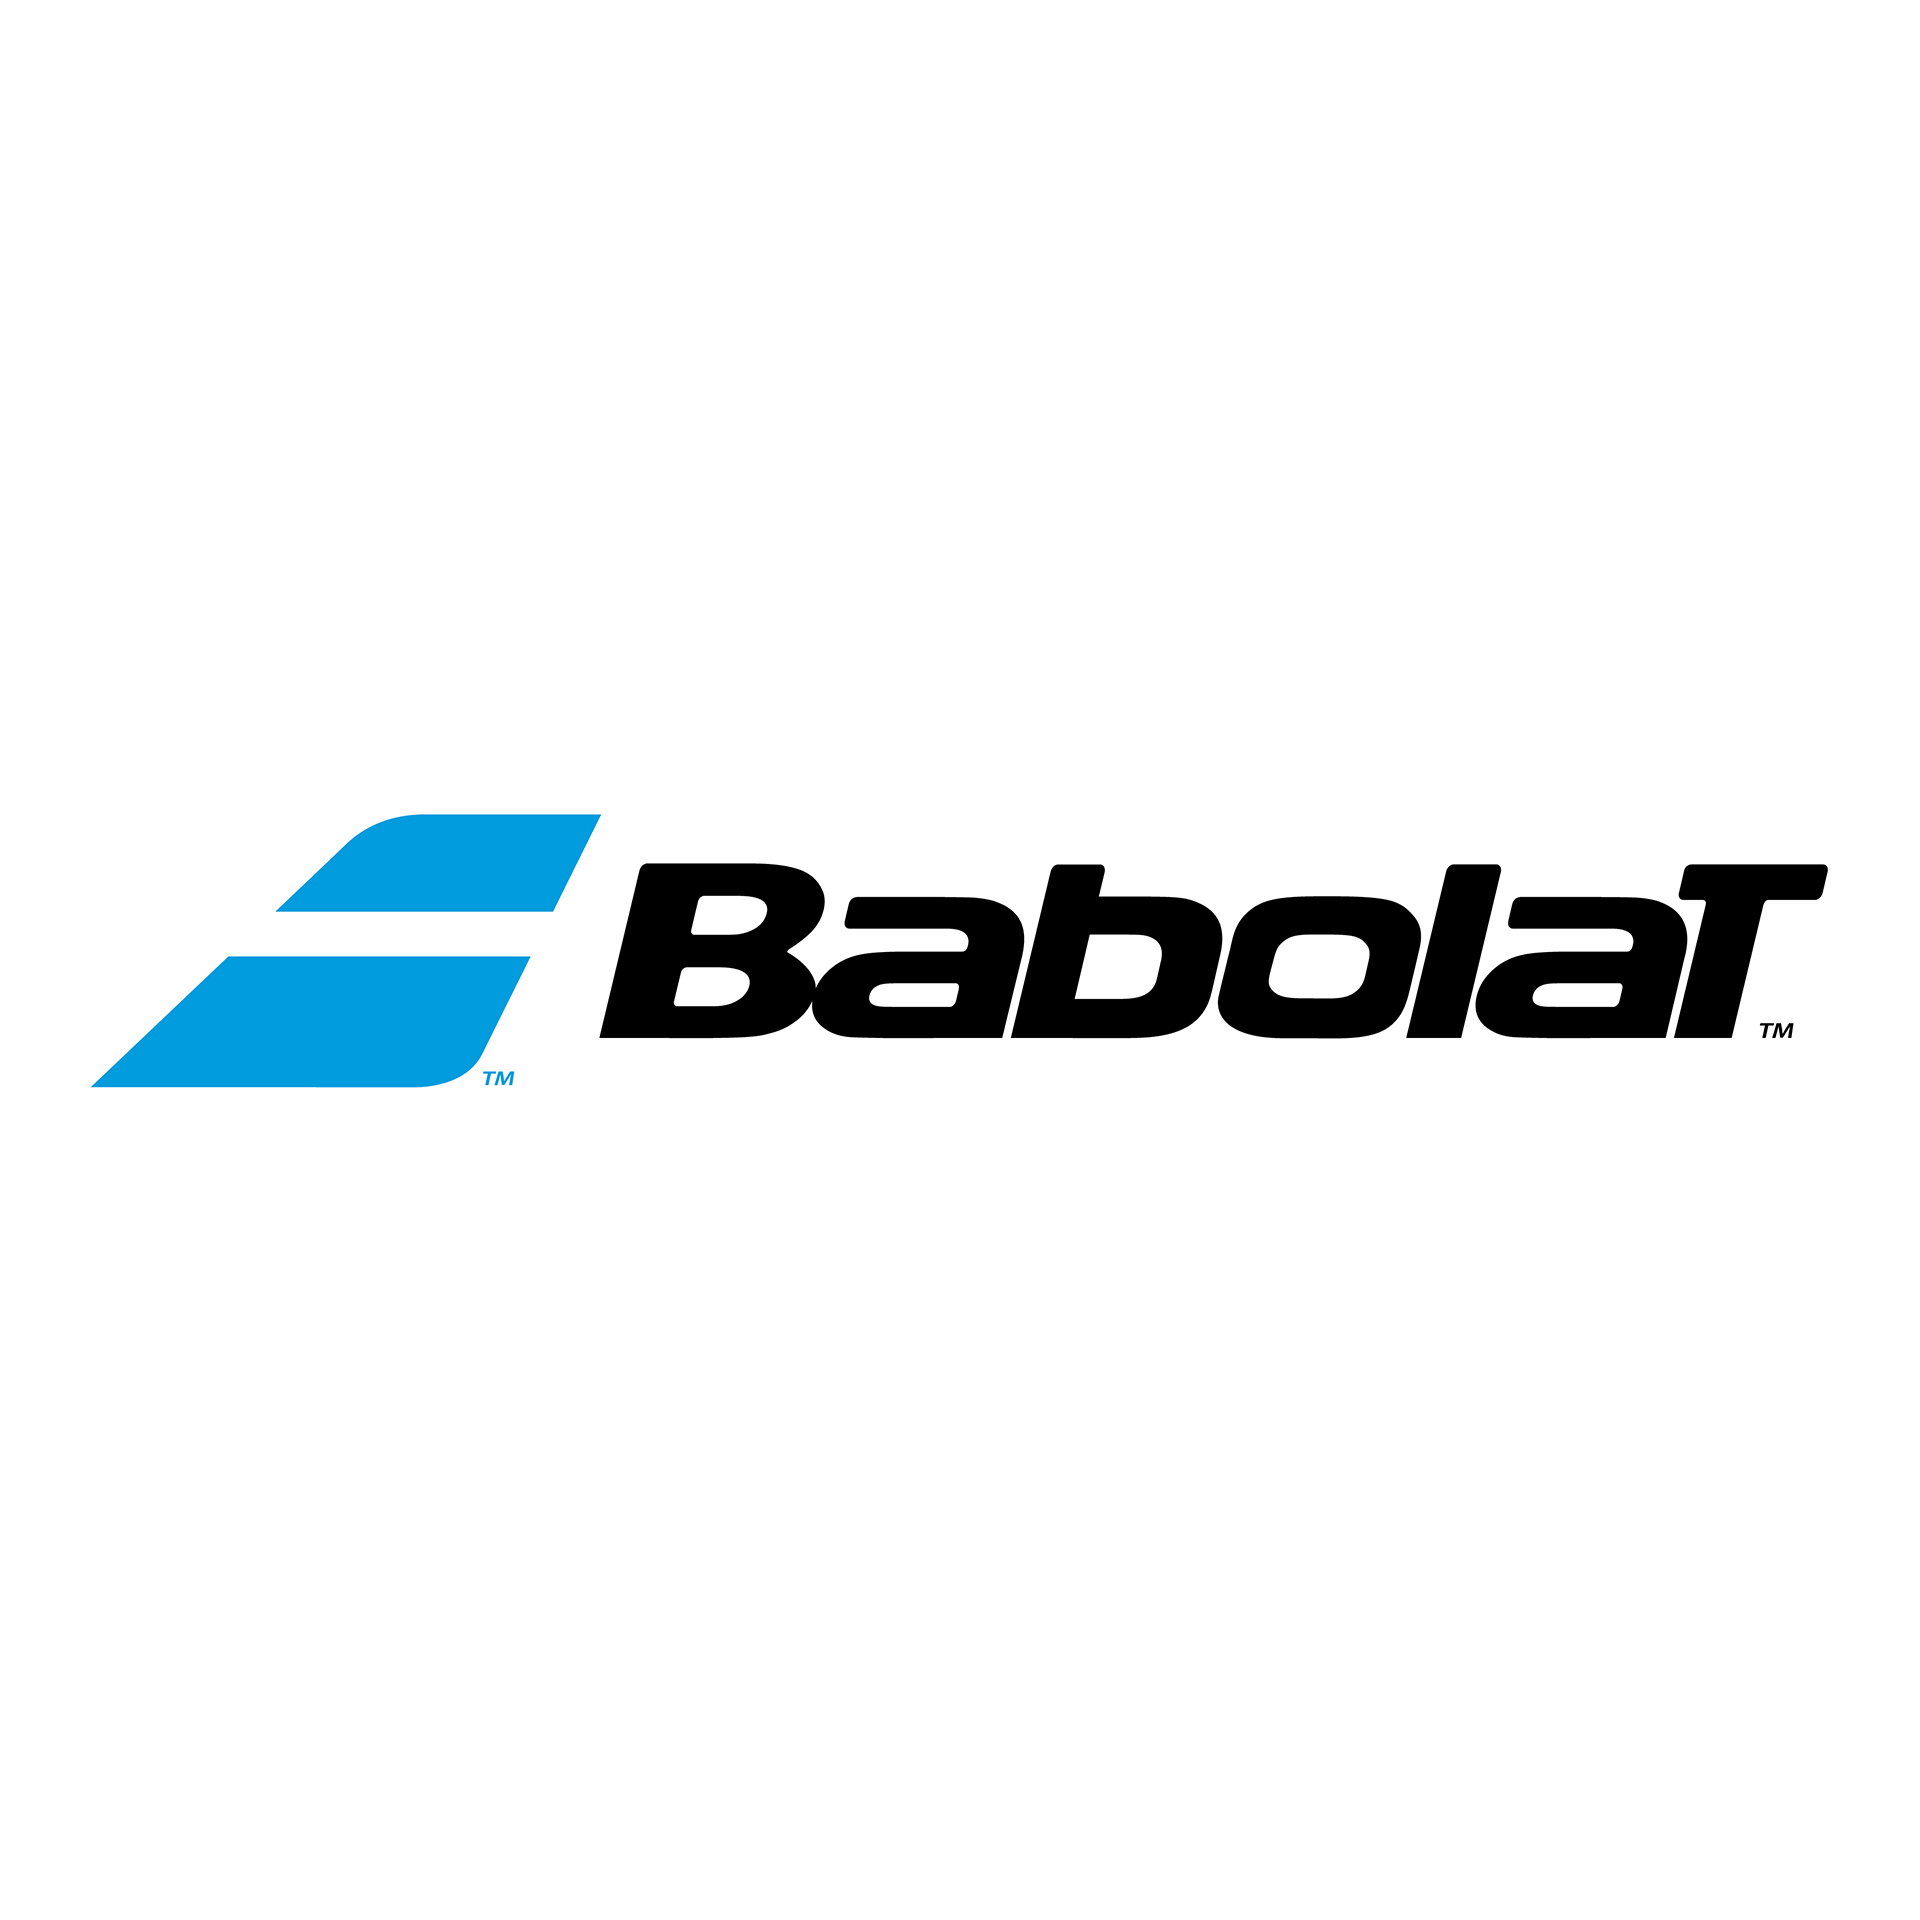 See the Babolat: the tennis star from Lyon success story